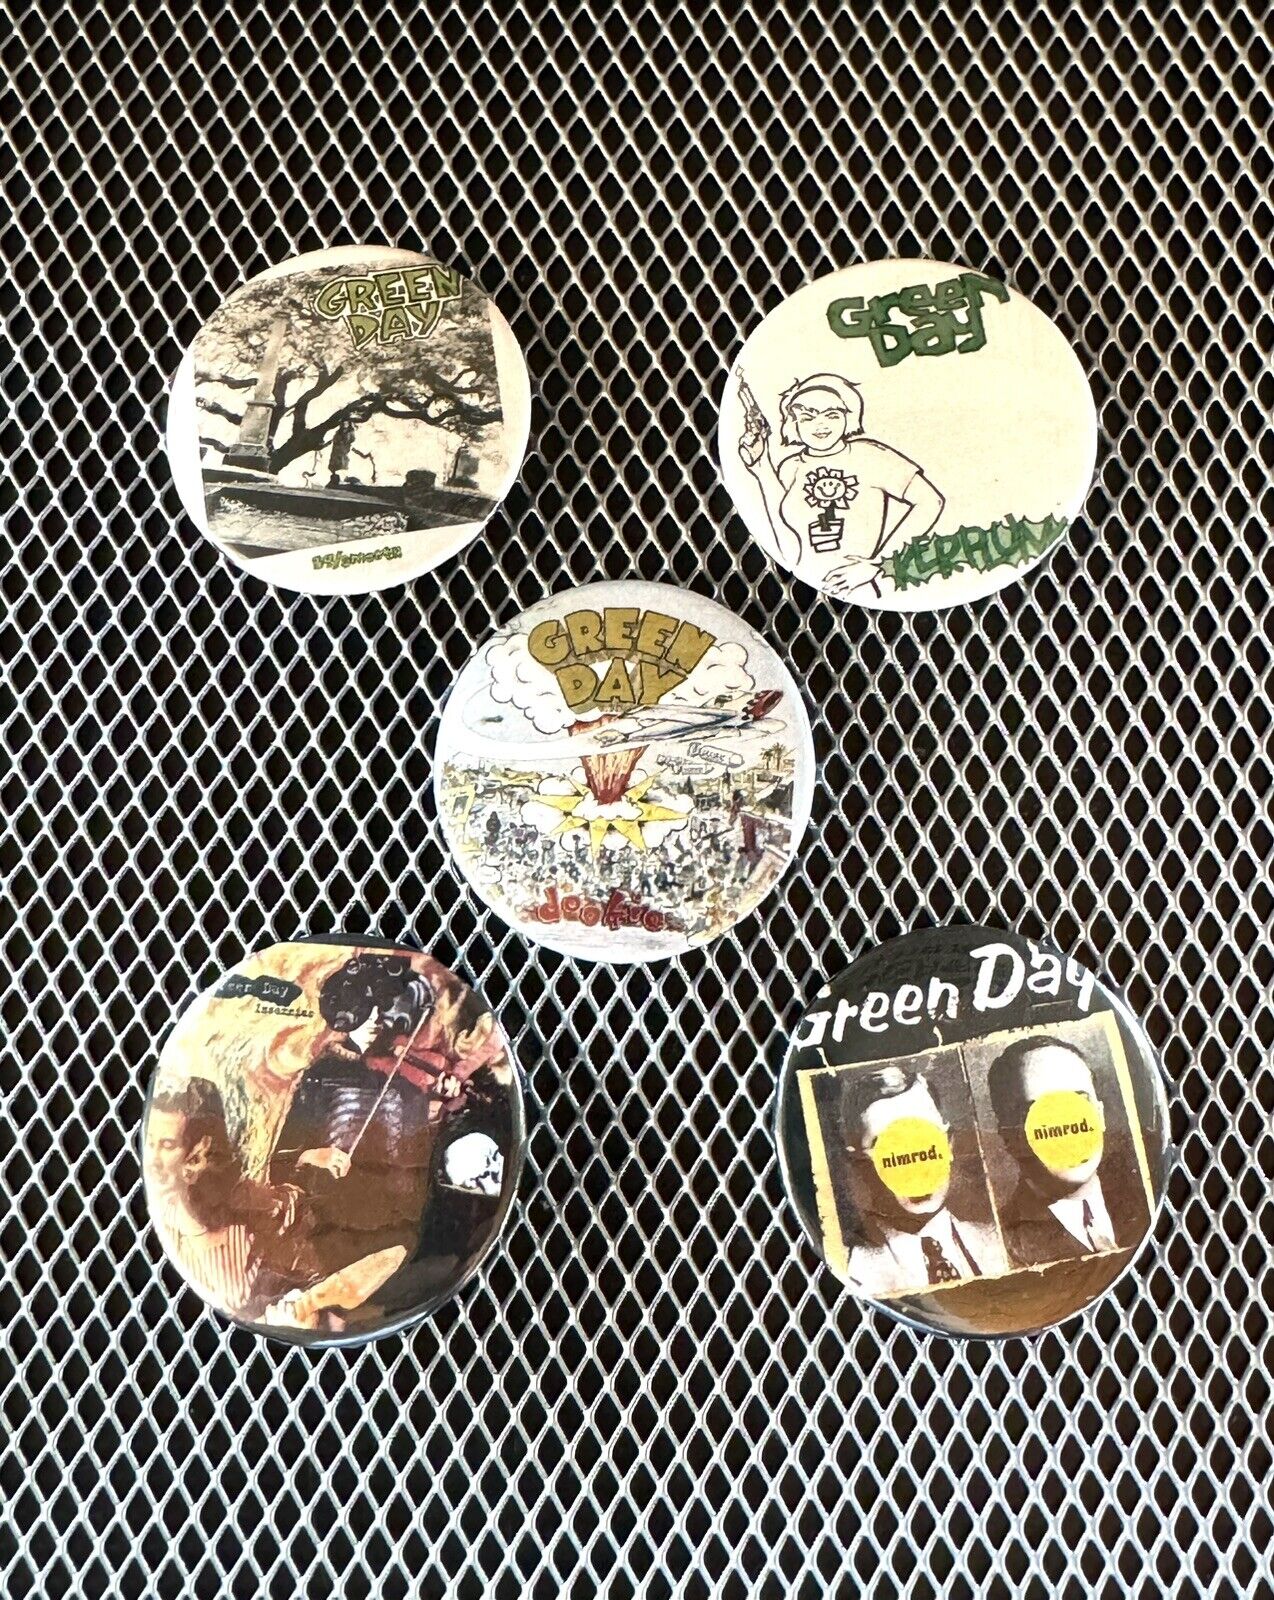 Green Day  “The First 5” Album Covers 1.5” Pin Back Buttons